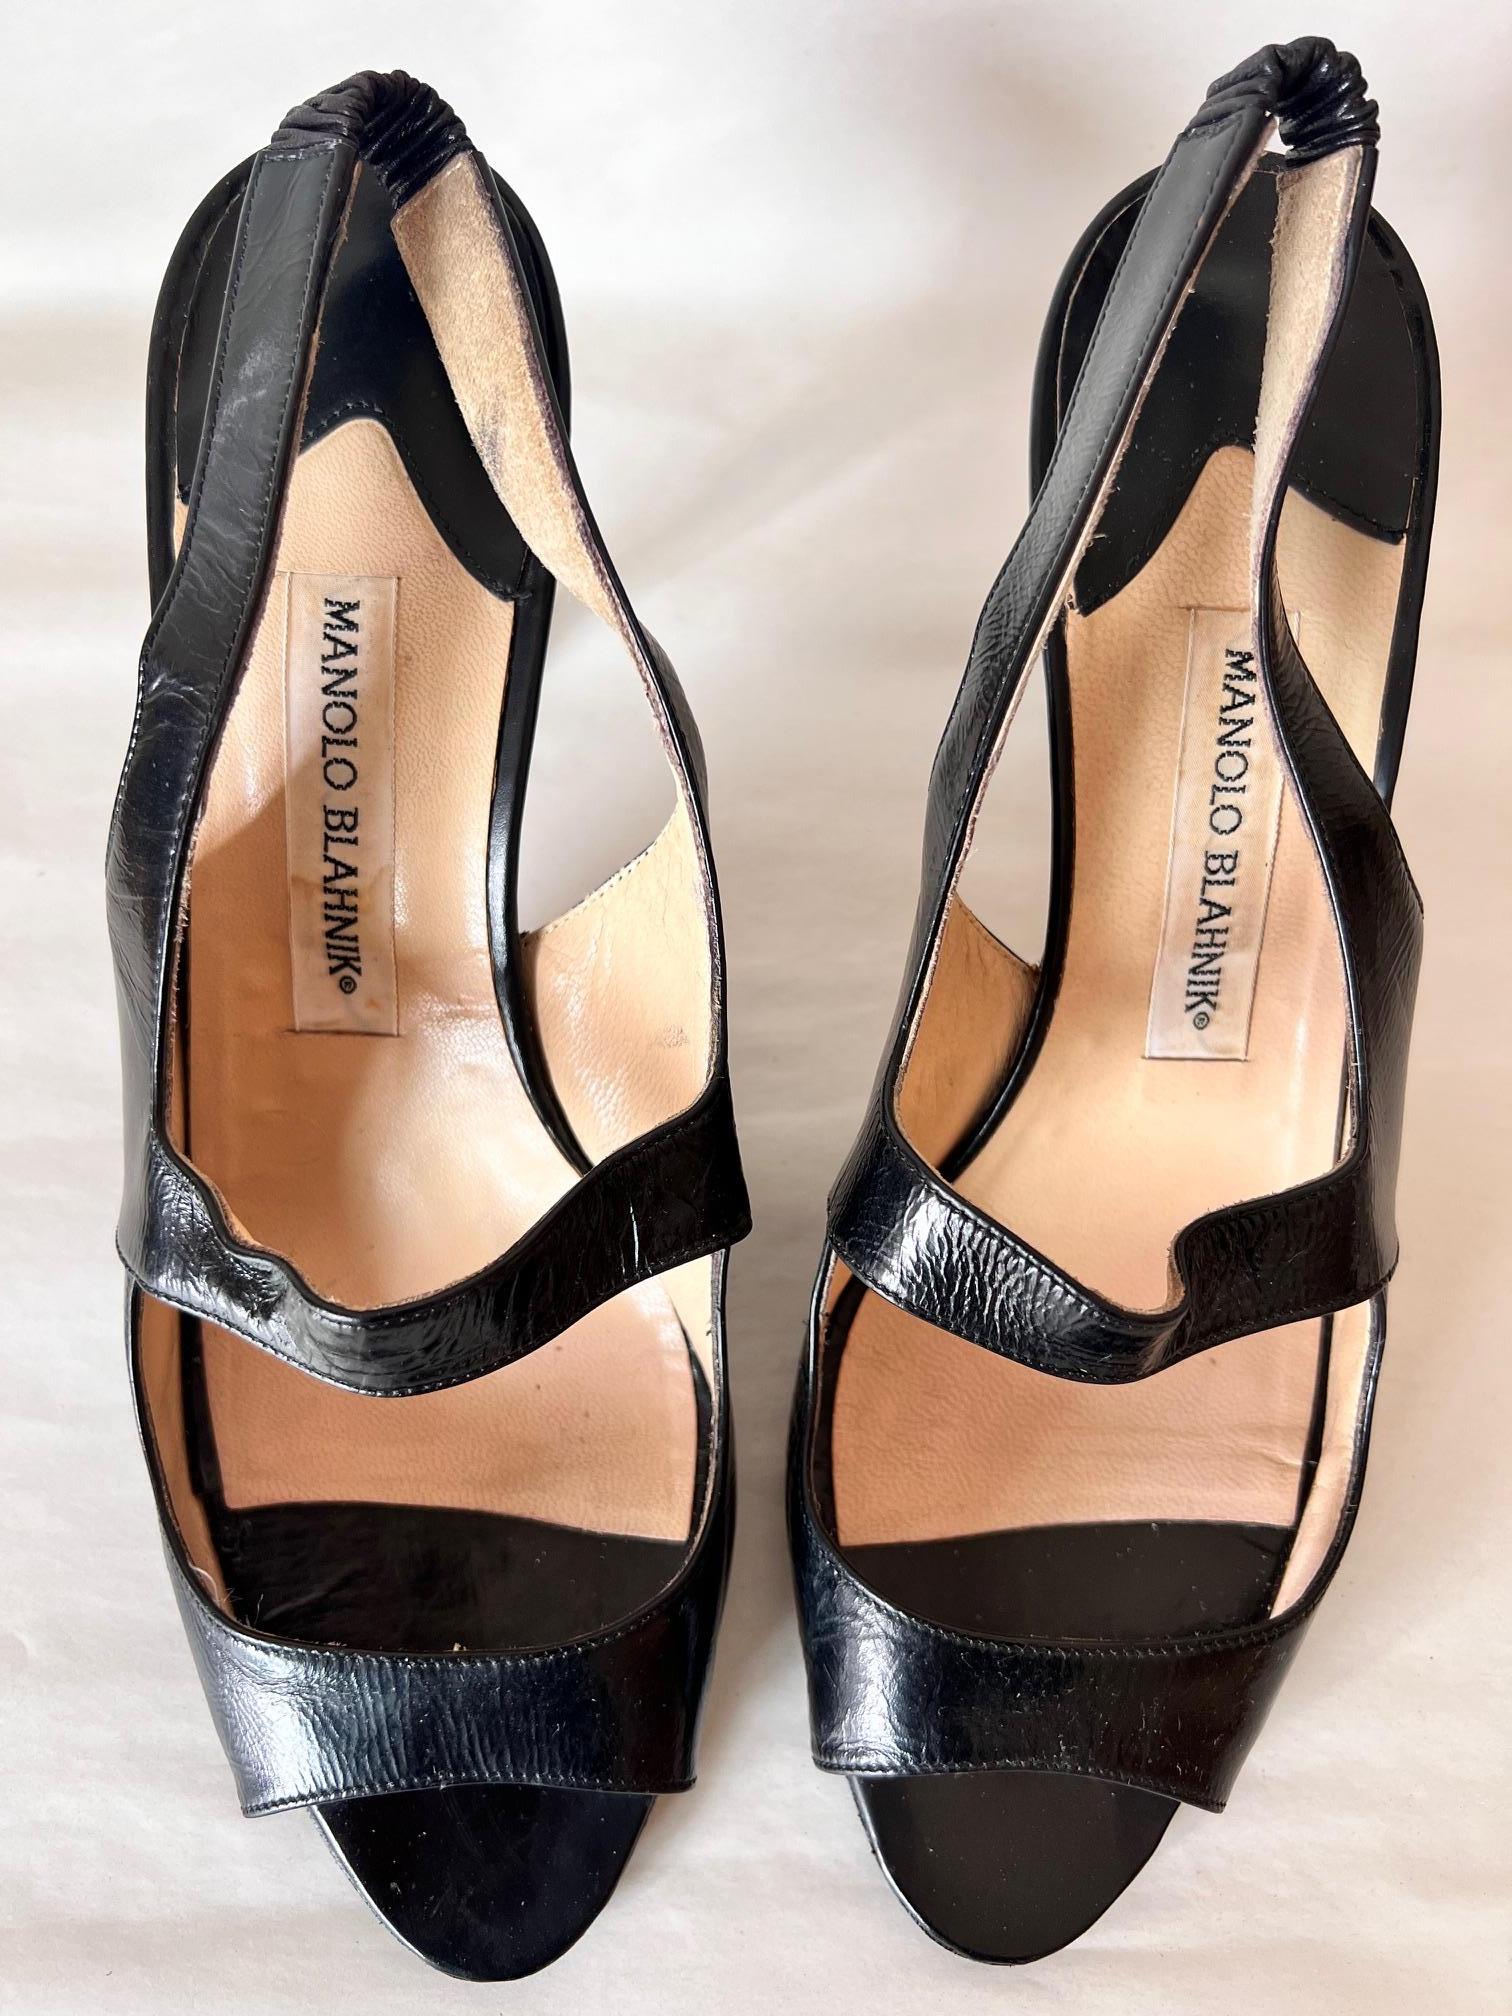 Manolo Blanik Black Satin Leather Cocktail Open Stripe Shoes For Sale 6